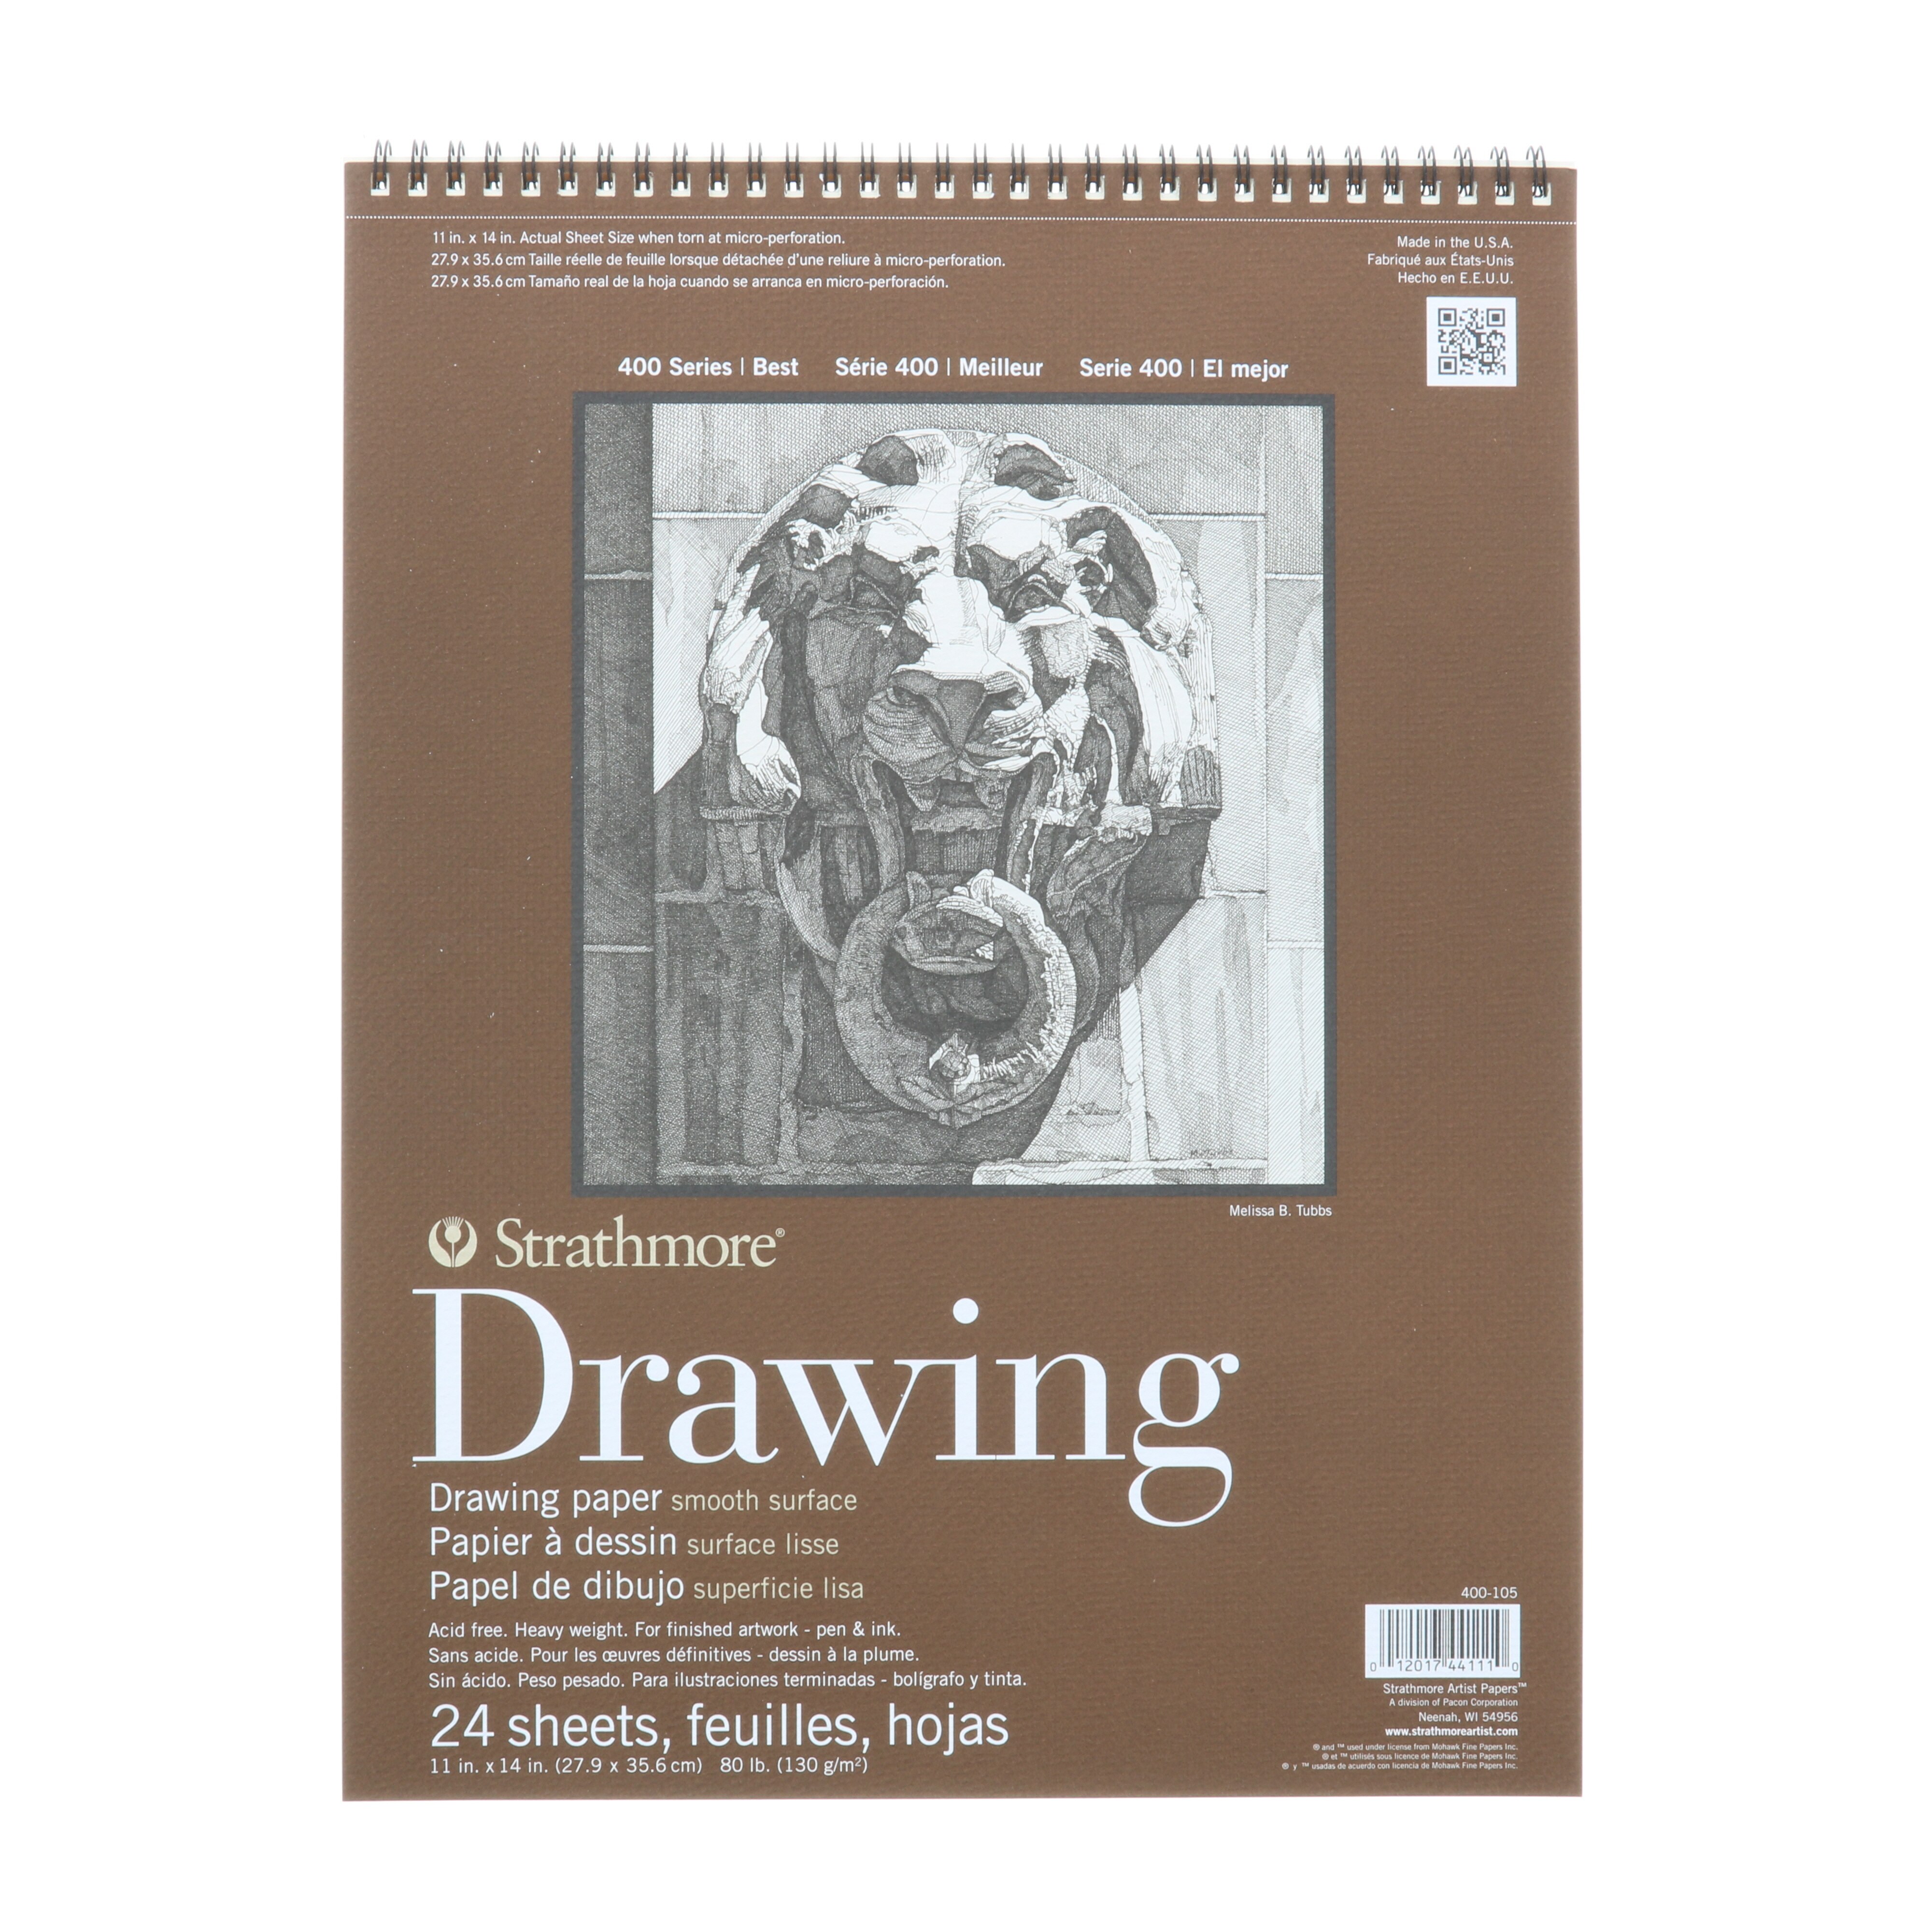 Strathmore Drawing Paper Pad, 400 Series, Smooth Surface, 11" x 14""